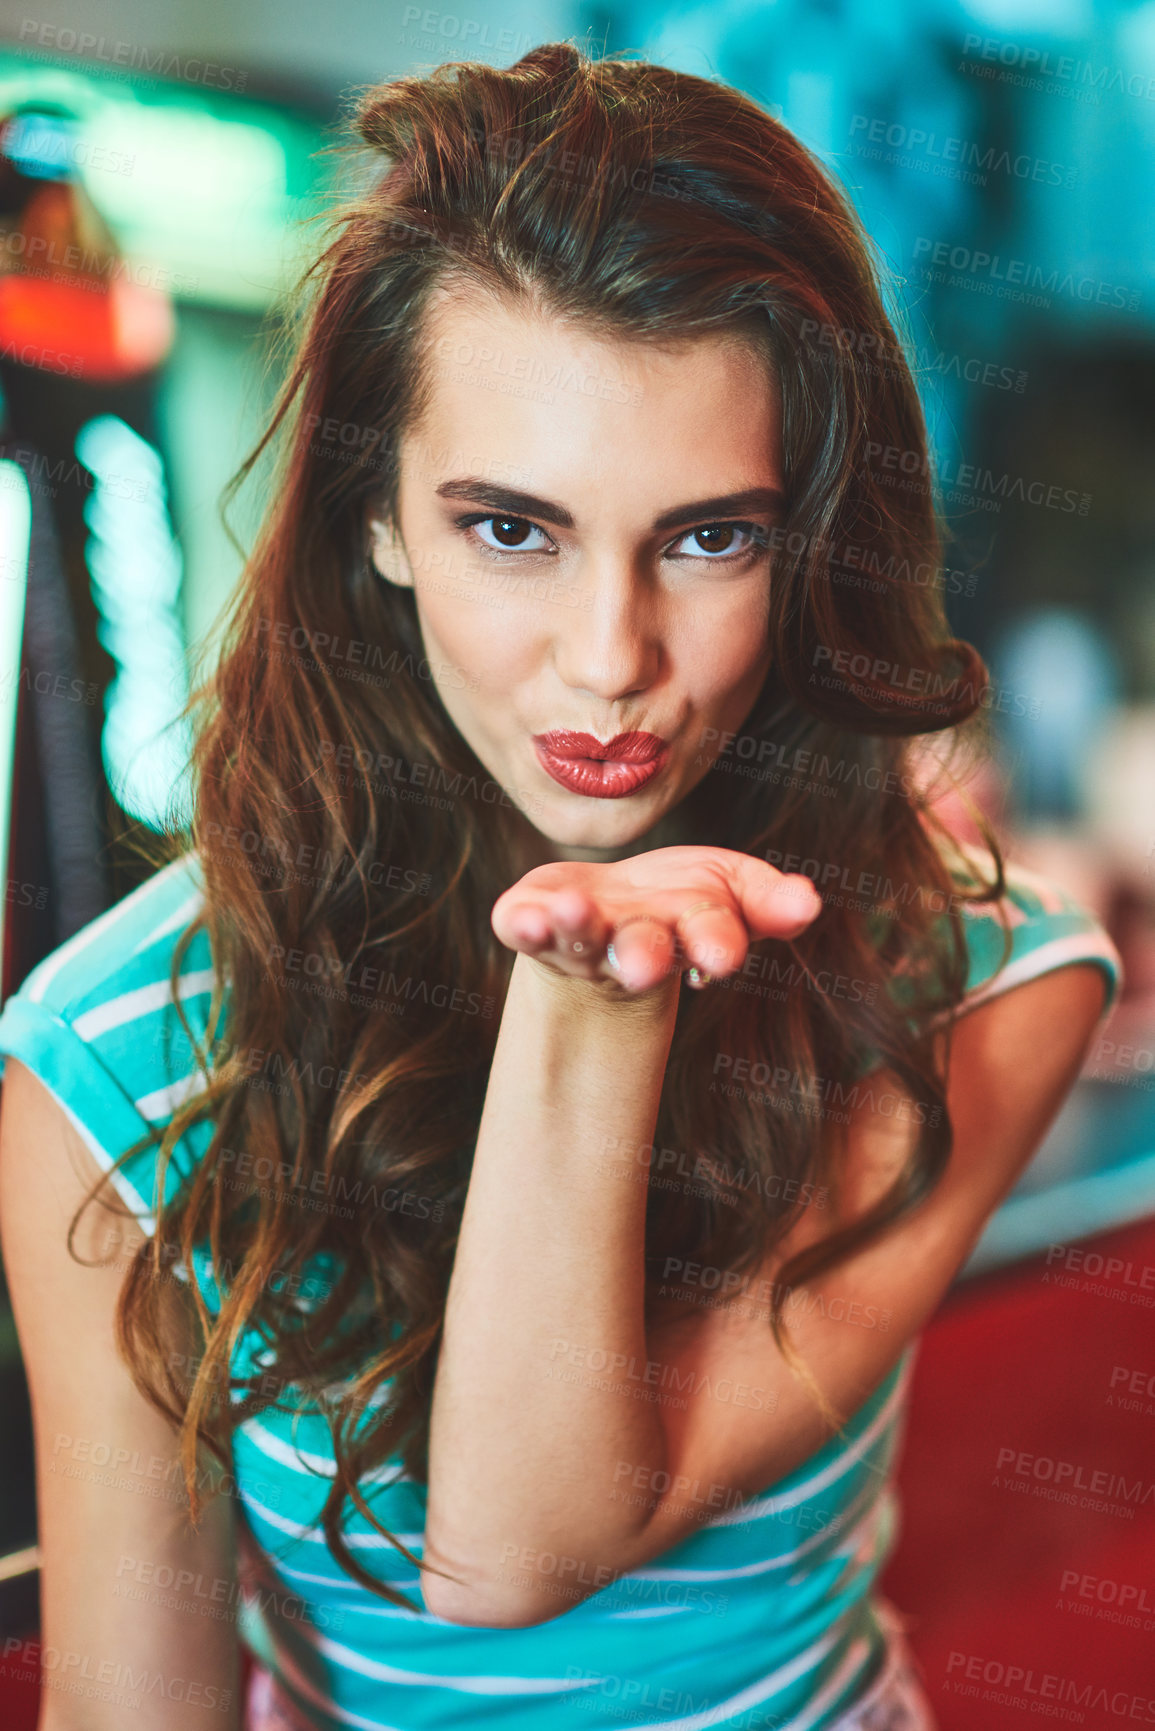 Buy stock photo Shot of a beautiful young woman in a diner